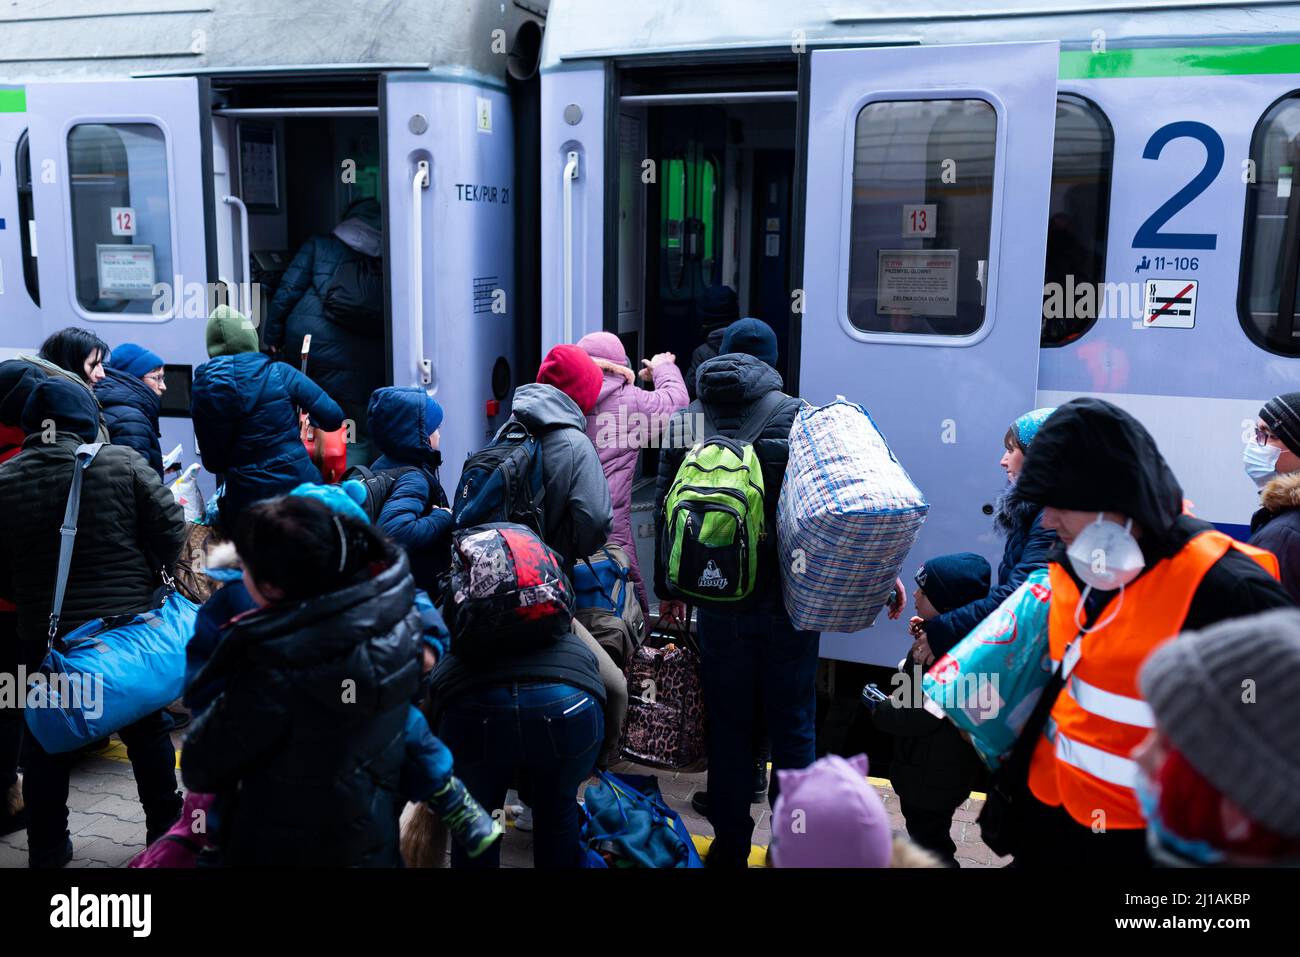 Refugees with suitcases board a train in Przemysil train station, close to the border with Ukraine, where refugees arrive by train as they flee the wa Stock Photo